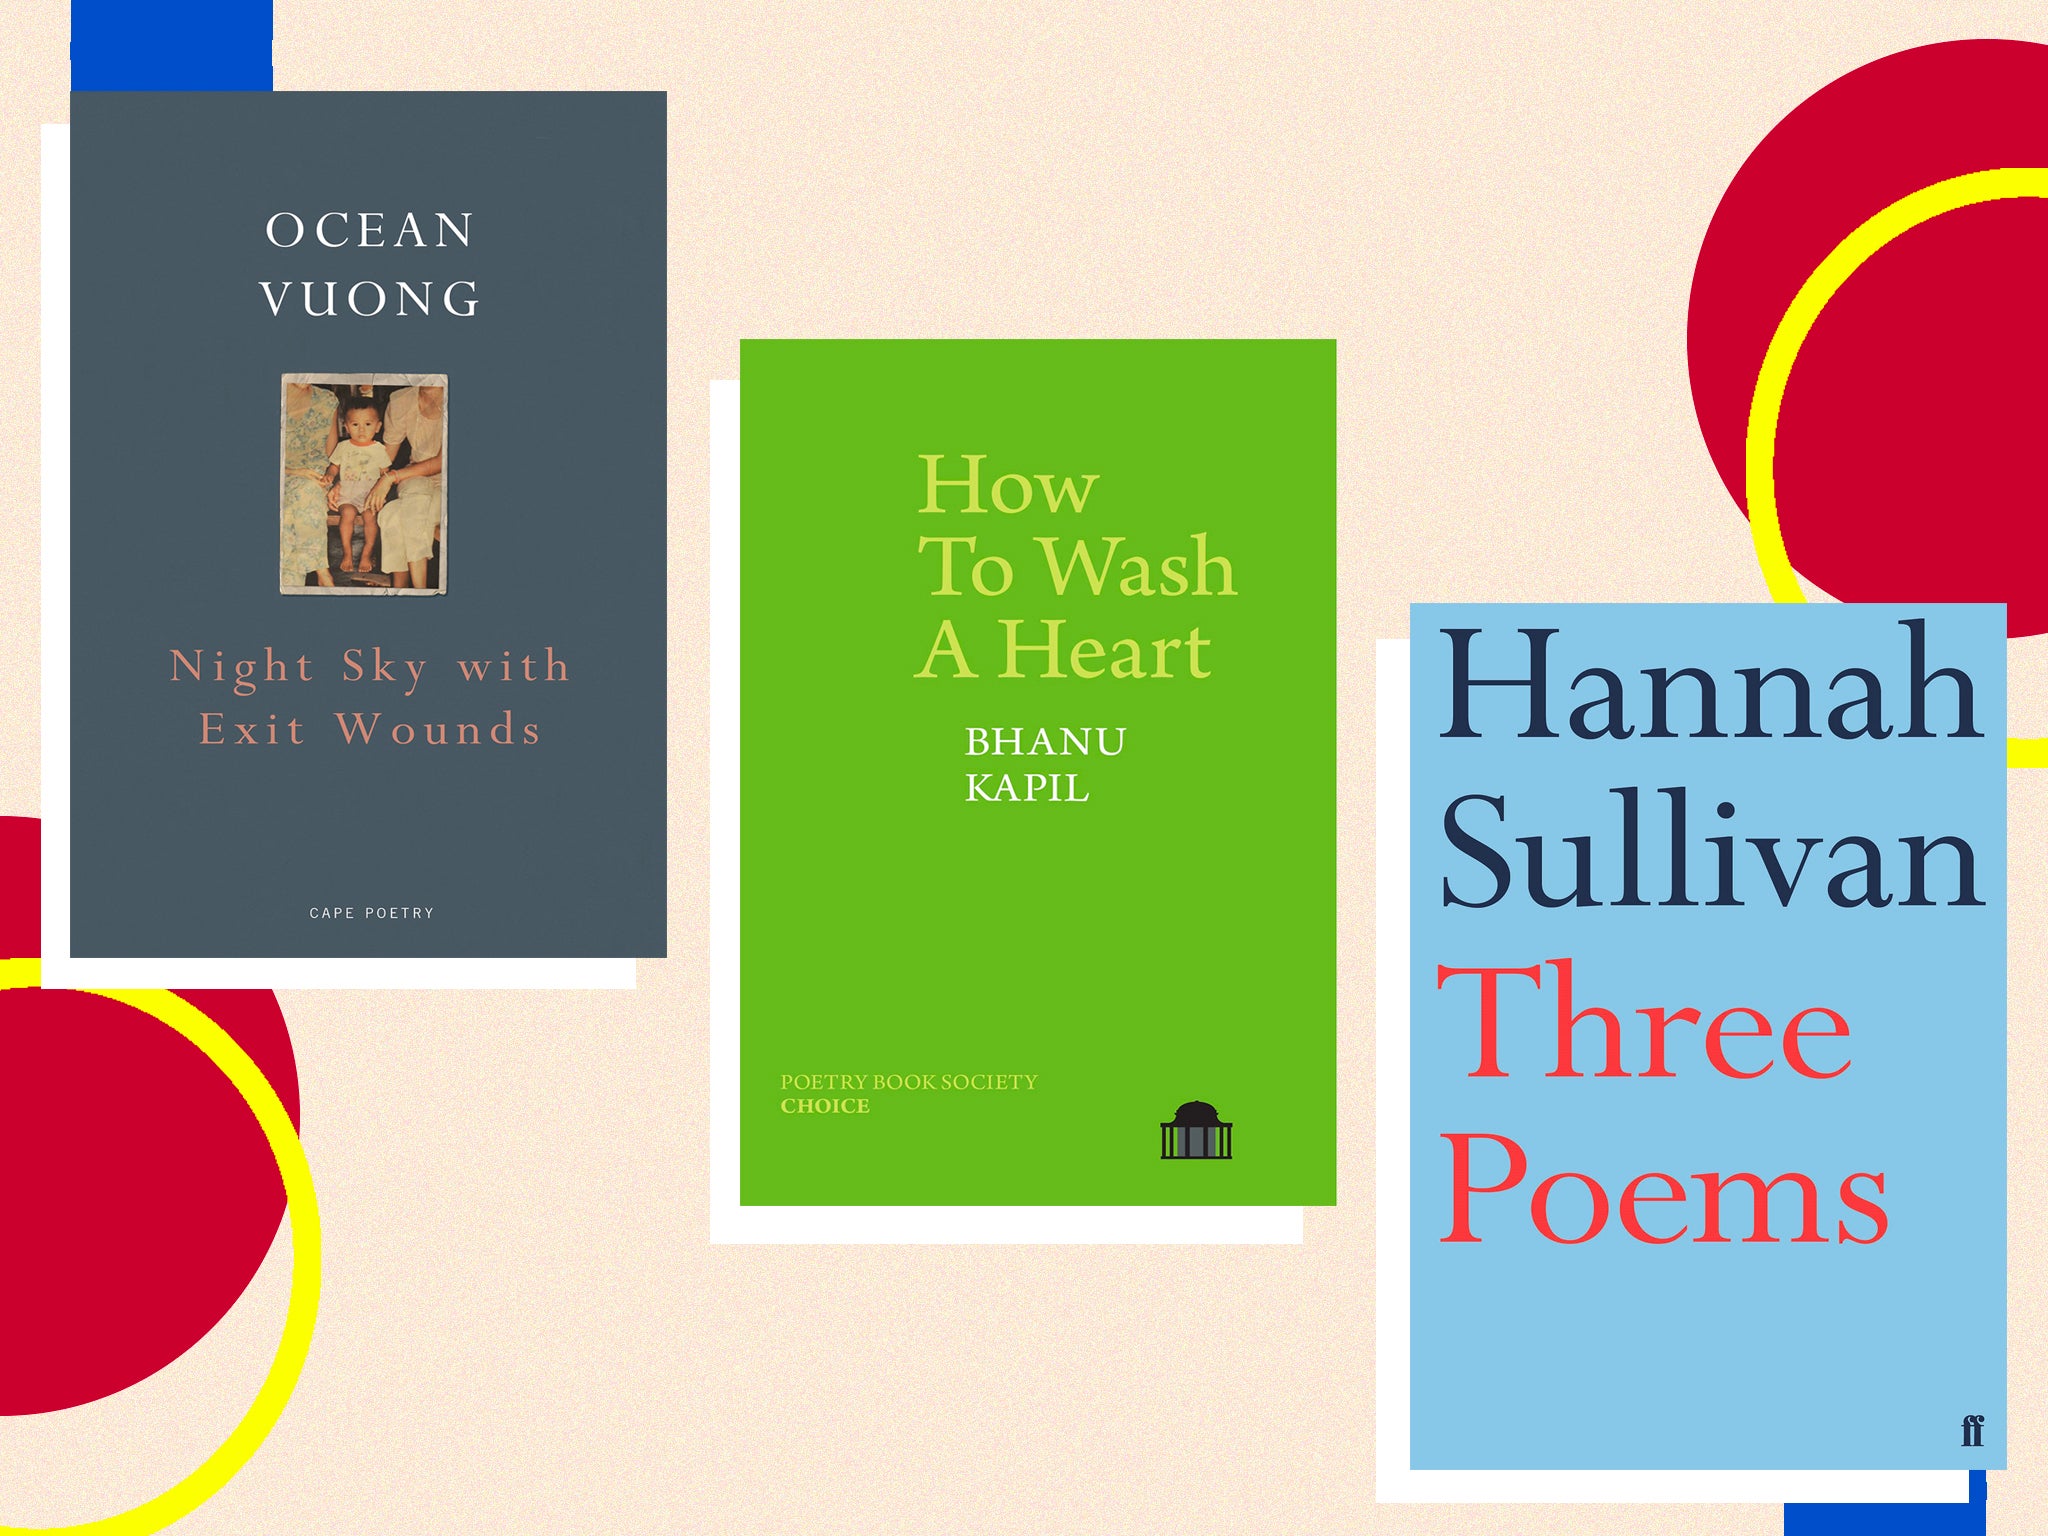 Discover the poetry of those who have claimed “the prize most poets want to win”